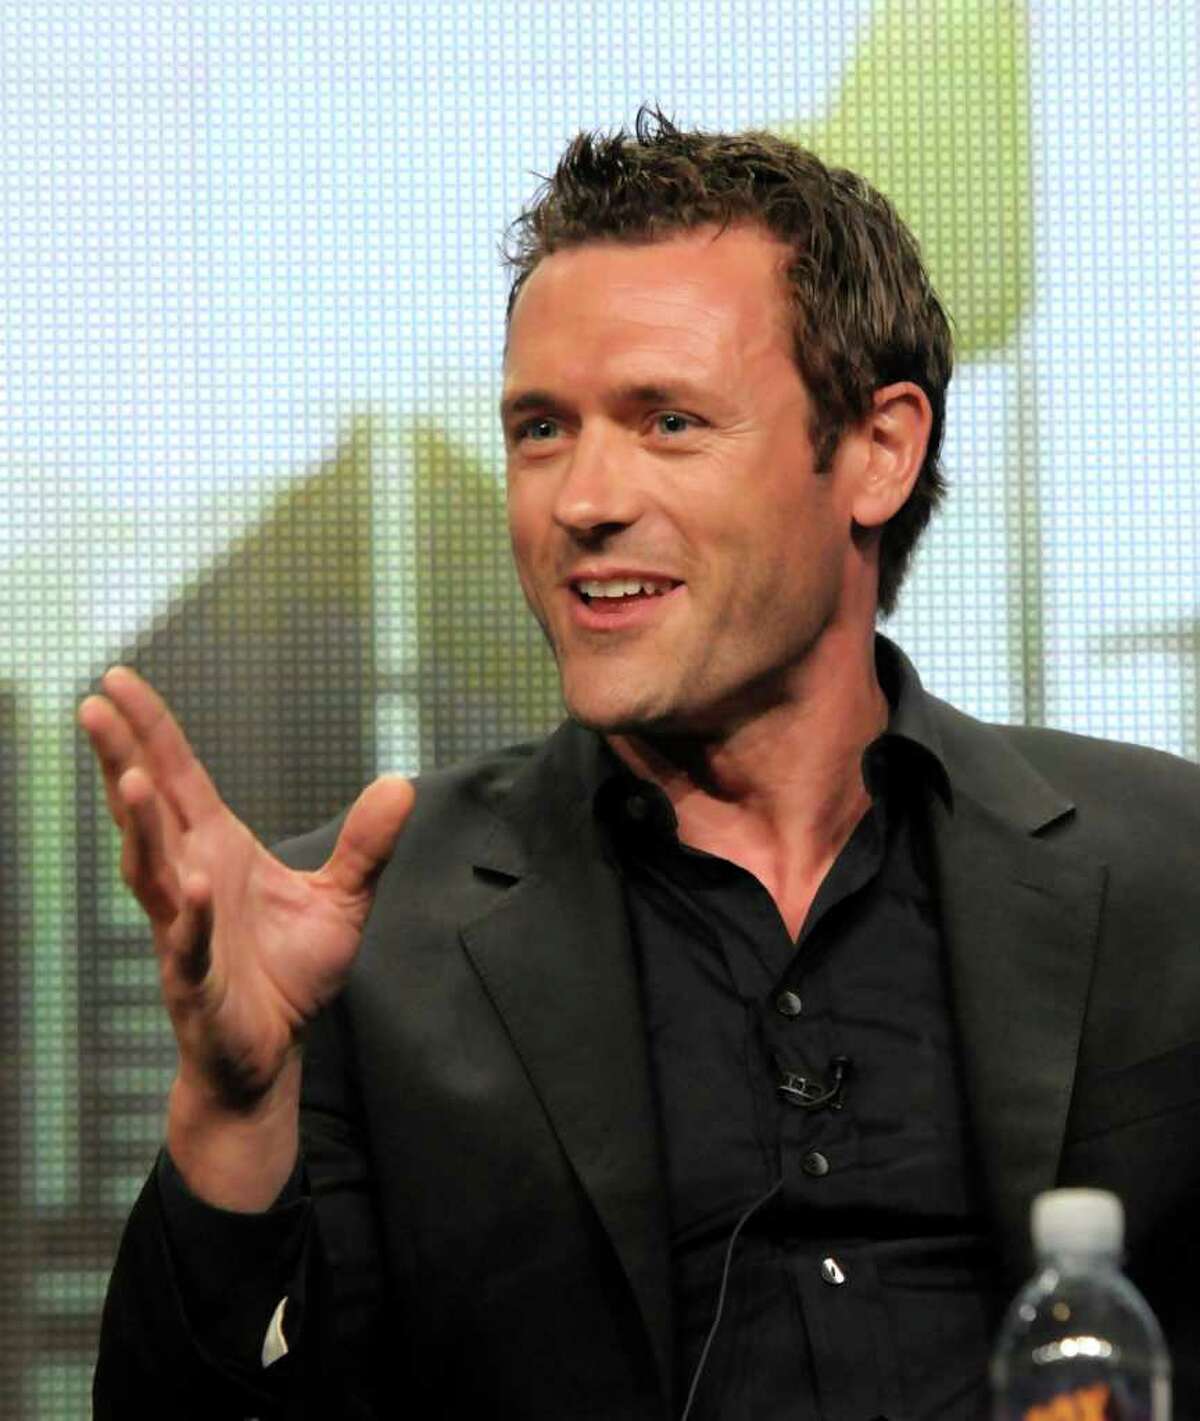 Actor Jason O'Mara speaks during a panel at the The Television Critics Association 2011 Summer Press Tour in Beverly Hills, Calif. on Friday, Aug. 5, 2011. O'Mara stars in the television series "Terra Nova" on FOX.